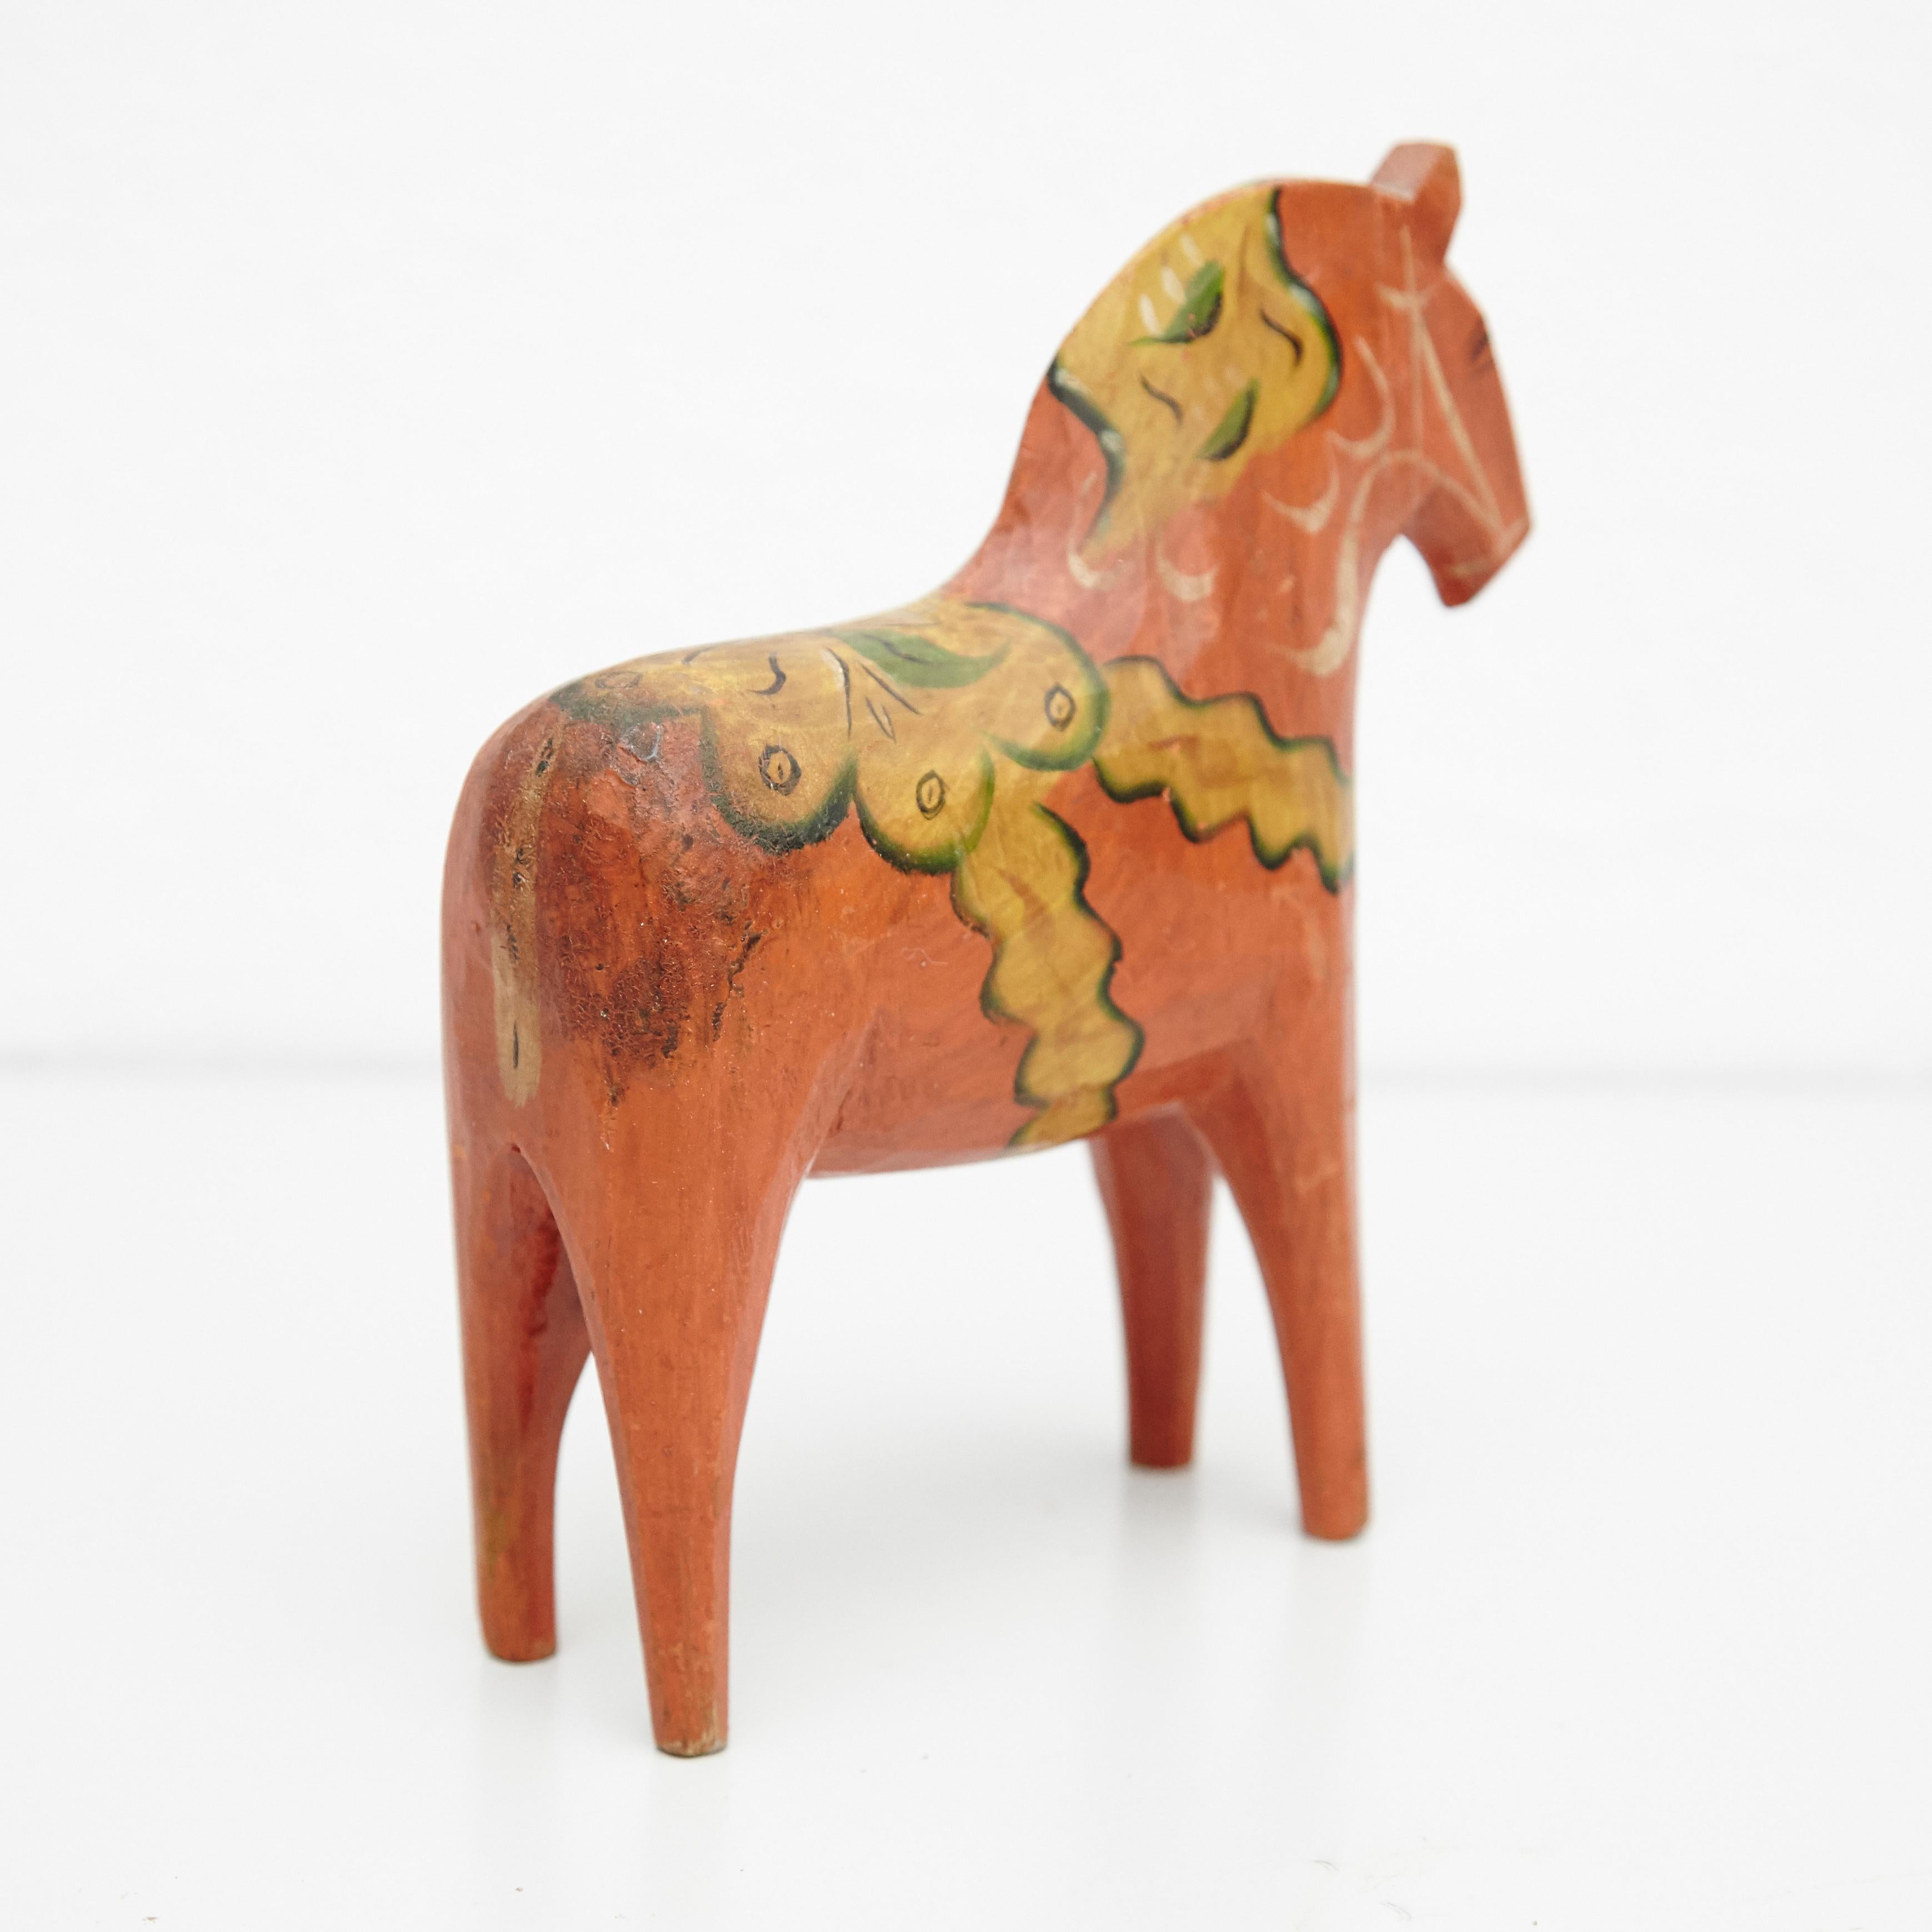 Swedish wooden horse toy
by unknown manufacturer, Sweden, circa 1920.

In original condition, with minor wear consistent with age and use, preserving a beautiful patina.

Materials:
Wood

Dimensions:
D 5 cm x W 16.5 cm x H 19 cm.